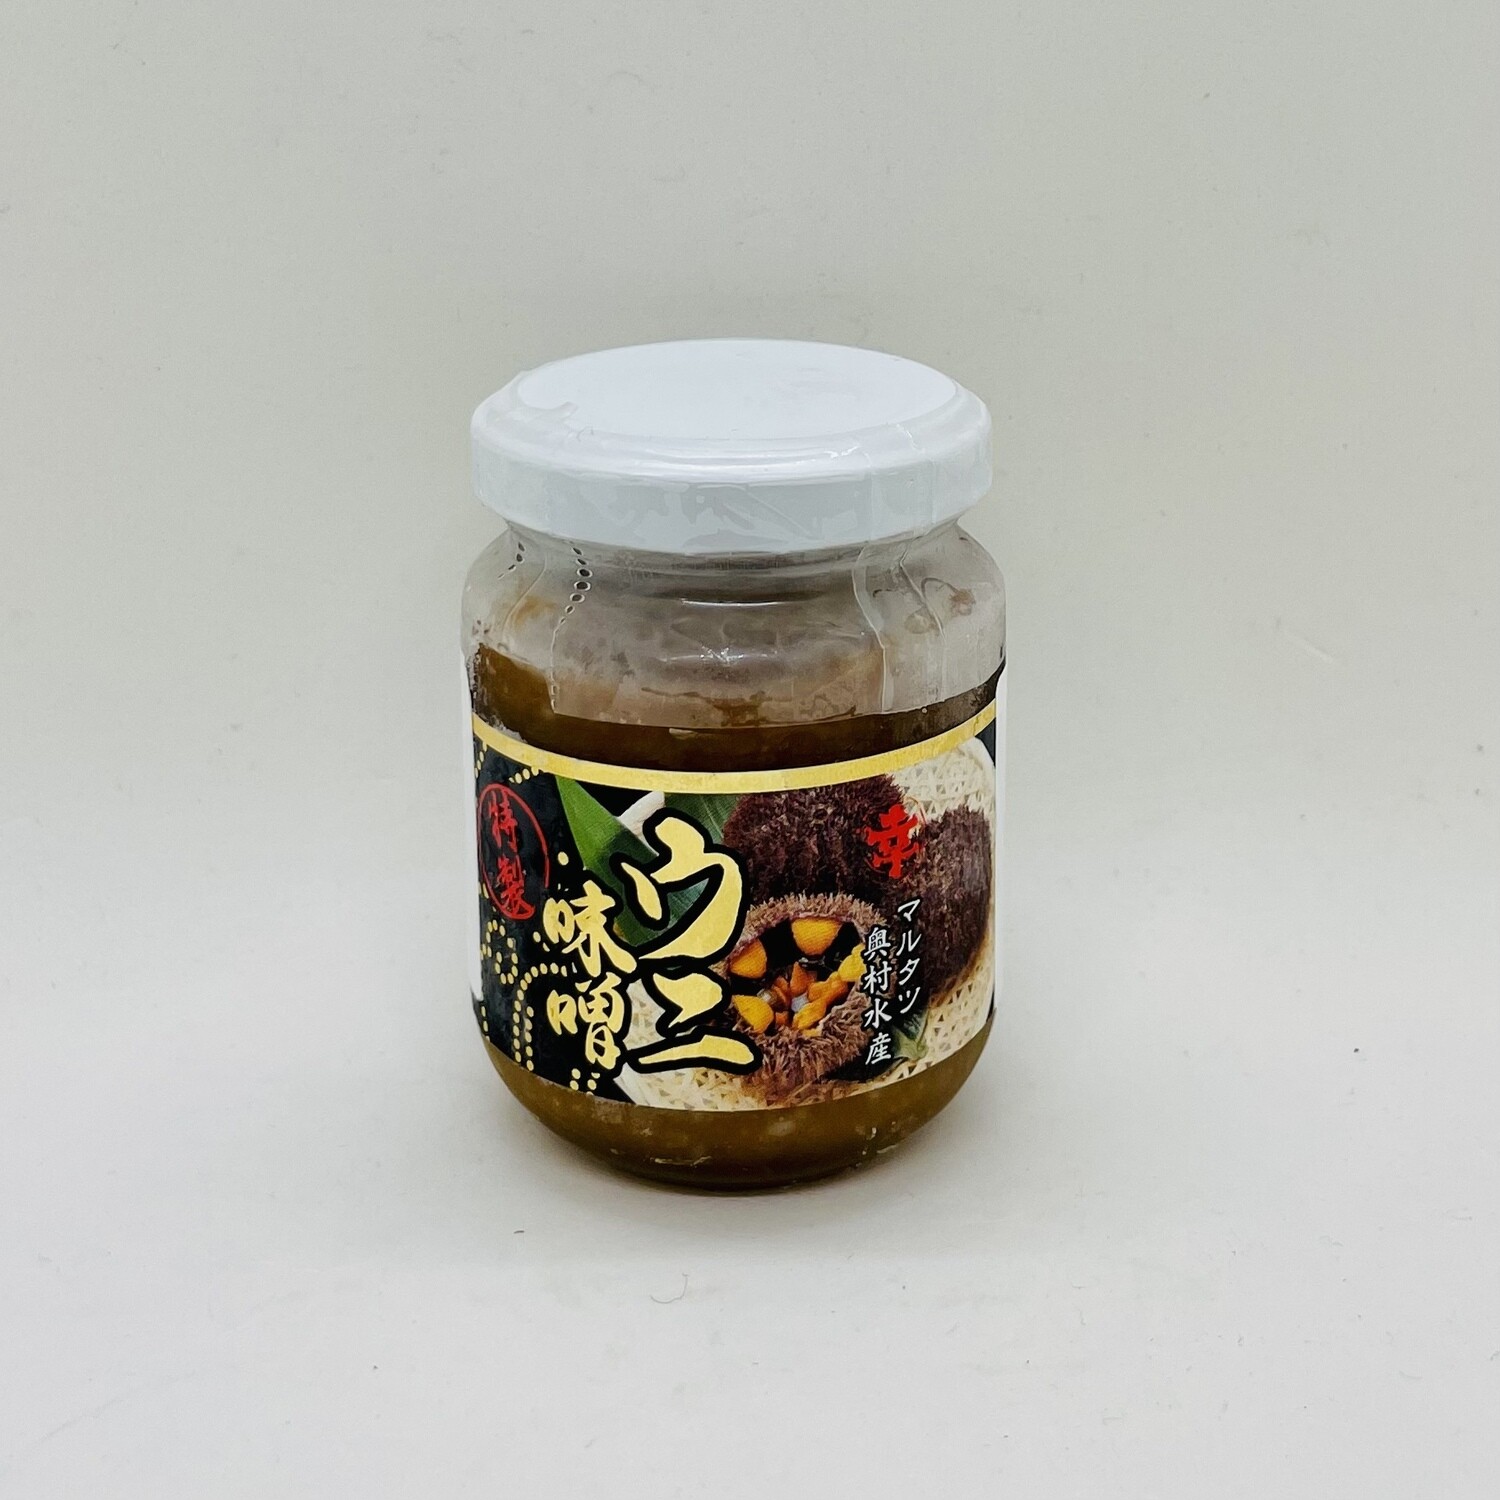 SALE! uni miso from Japan